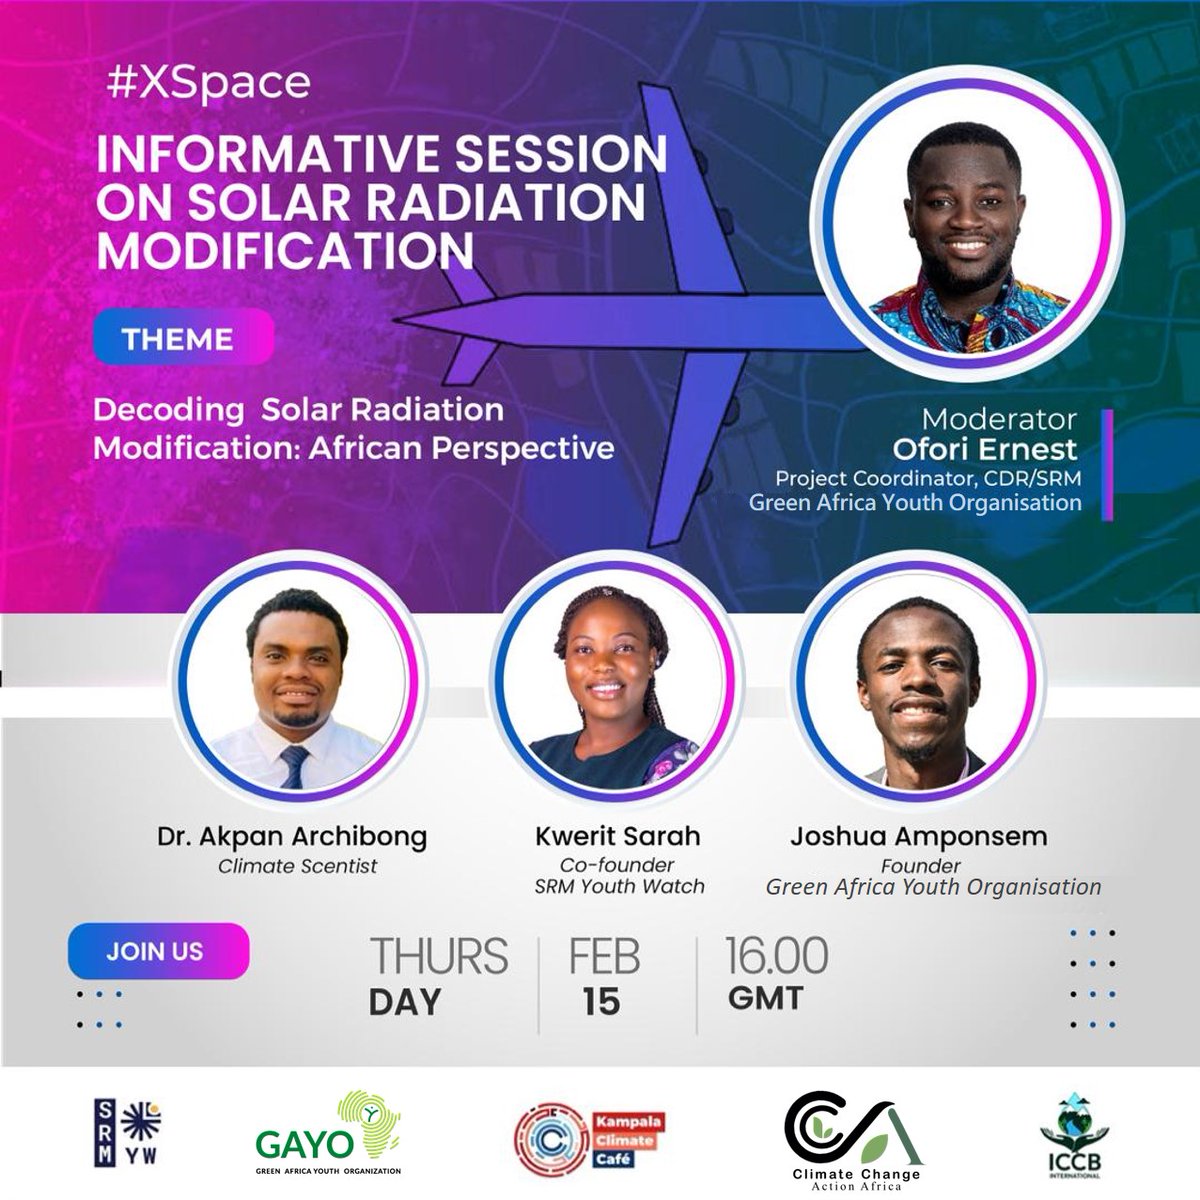 In a world grappling with climate change, innovations like Solar Radiation Modification (SRM) emerge as potential solutions. 

In this thread, I explain what #SRM is and what to expect in an informative @srmyouthwatch space at 7pm EAT via: twitter.com/i/spaces/1vAxR

#SRMAfrica